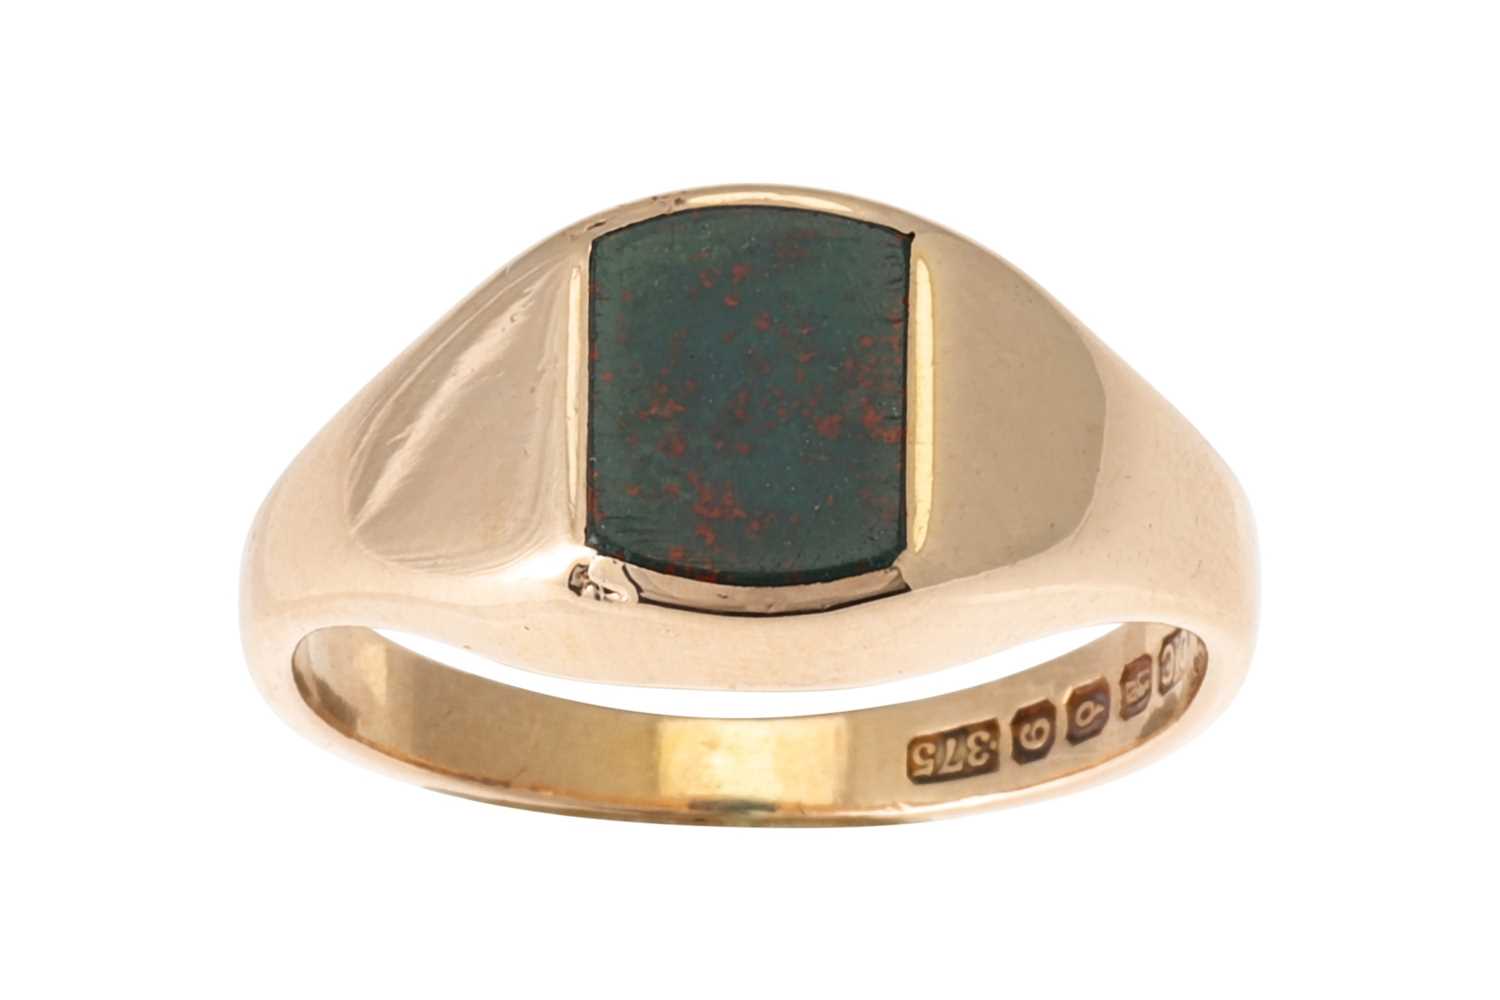 Lot 62 - A BLOODSTONE SIGNET RING, mounted in 9ct gold